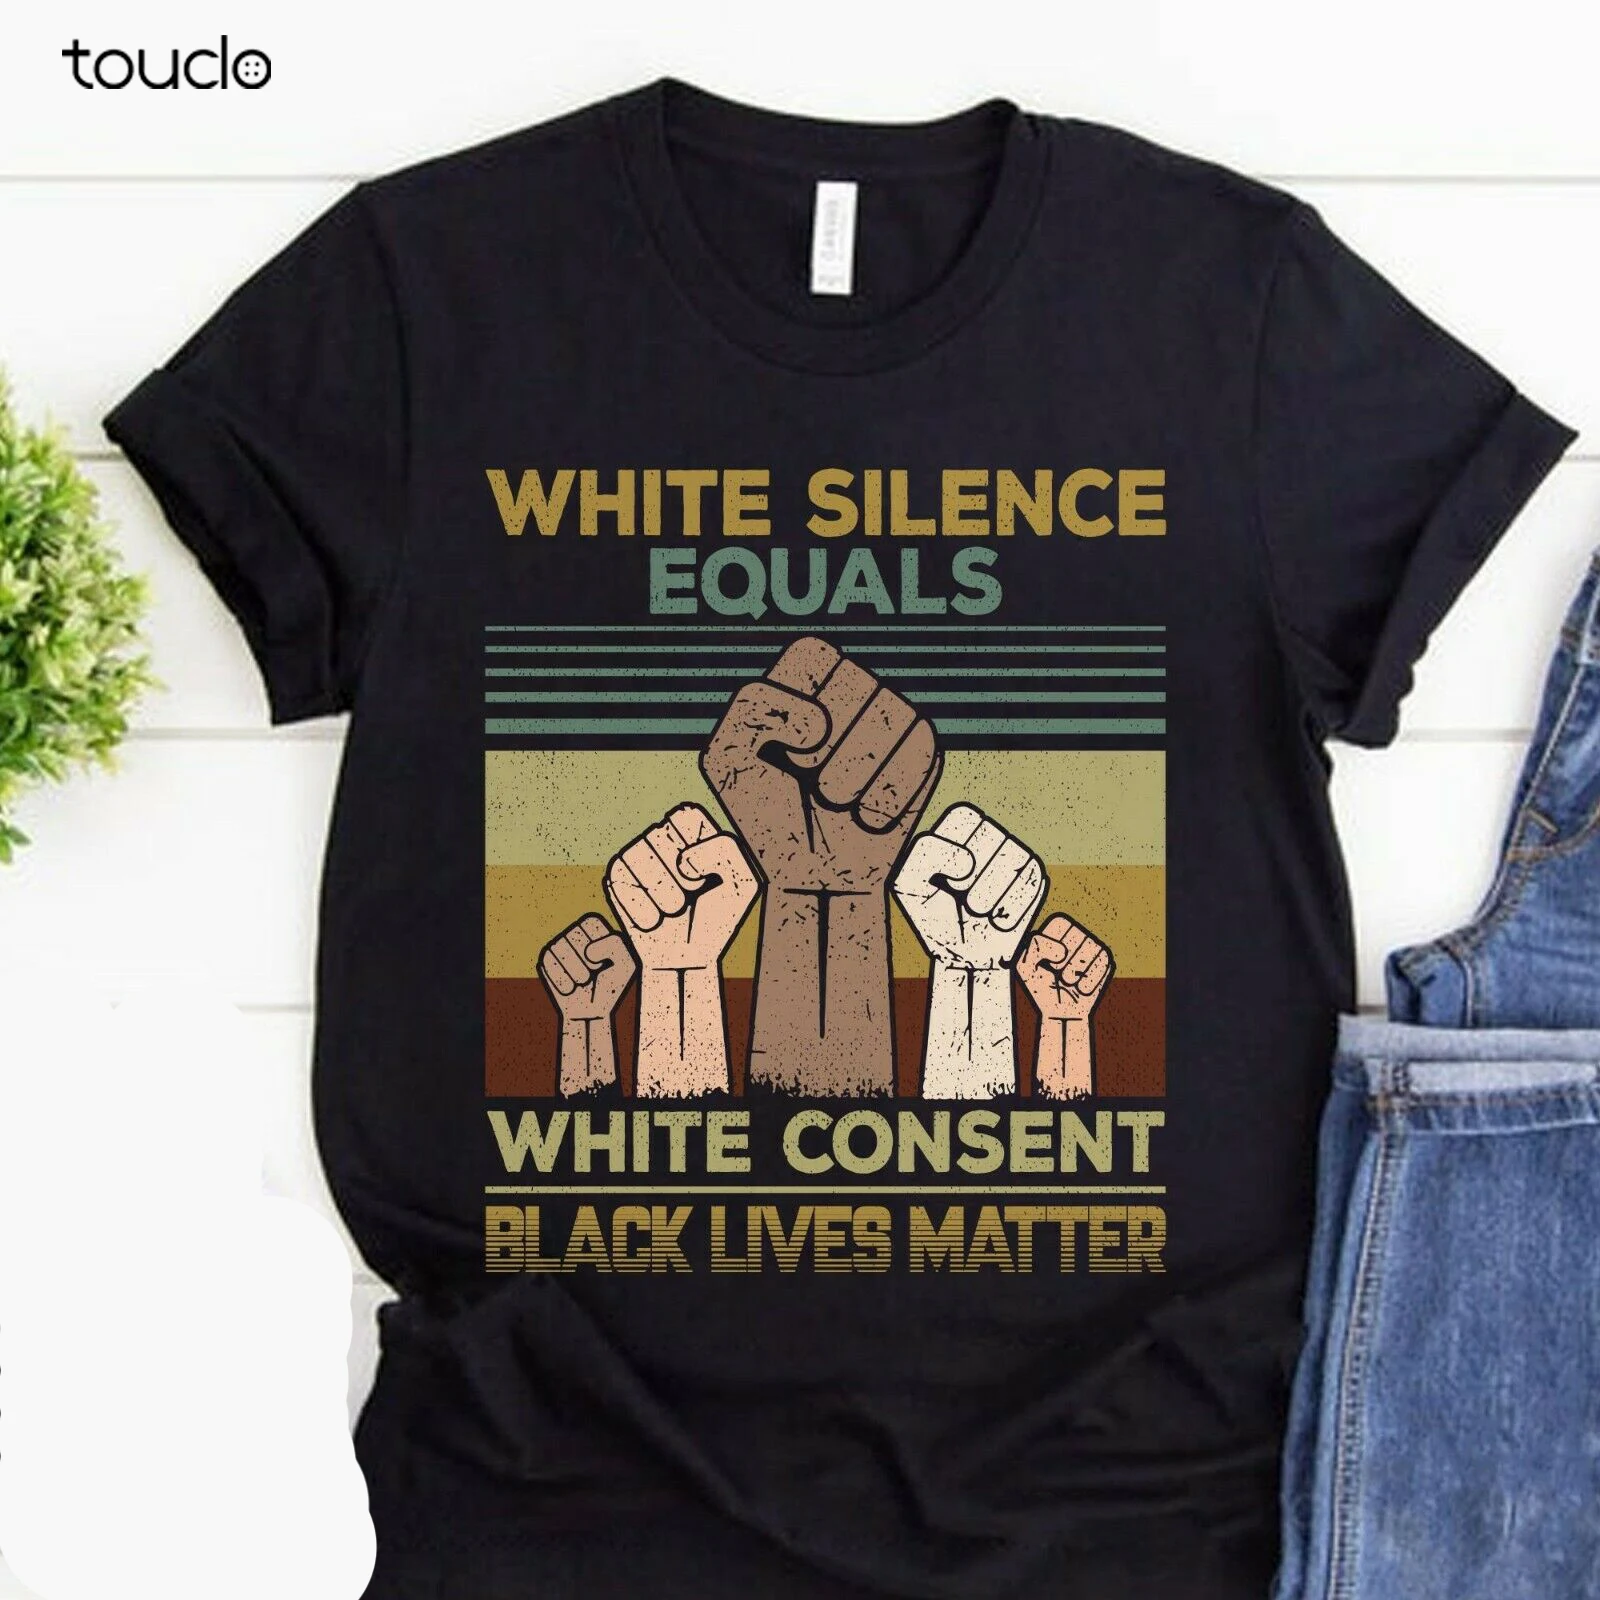 New White Silence Equals White Consent Shirt Black Lives Matter Tee Unisex S-5Xl Xs-5Xl Custom Gift Creative Funny Tee